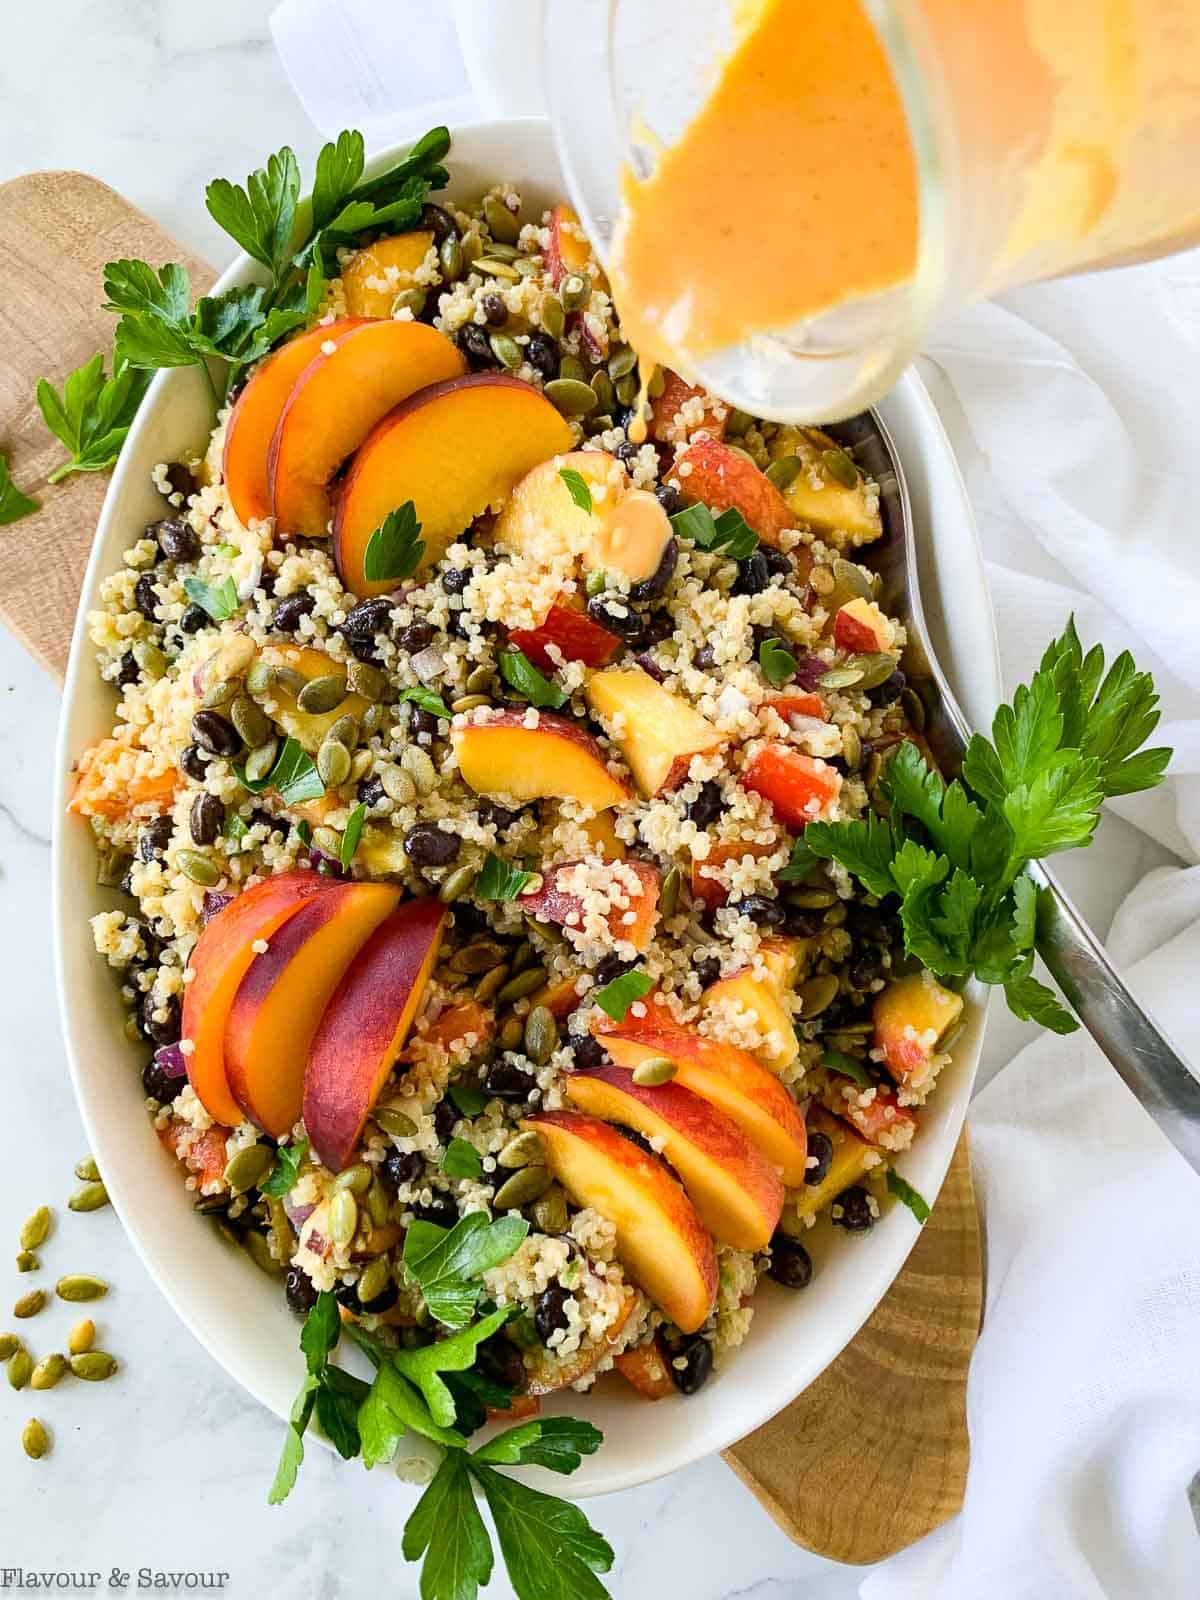 Adding dressing to an oval bowl of quinoa black bean salad with peaches.